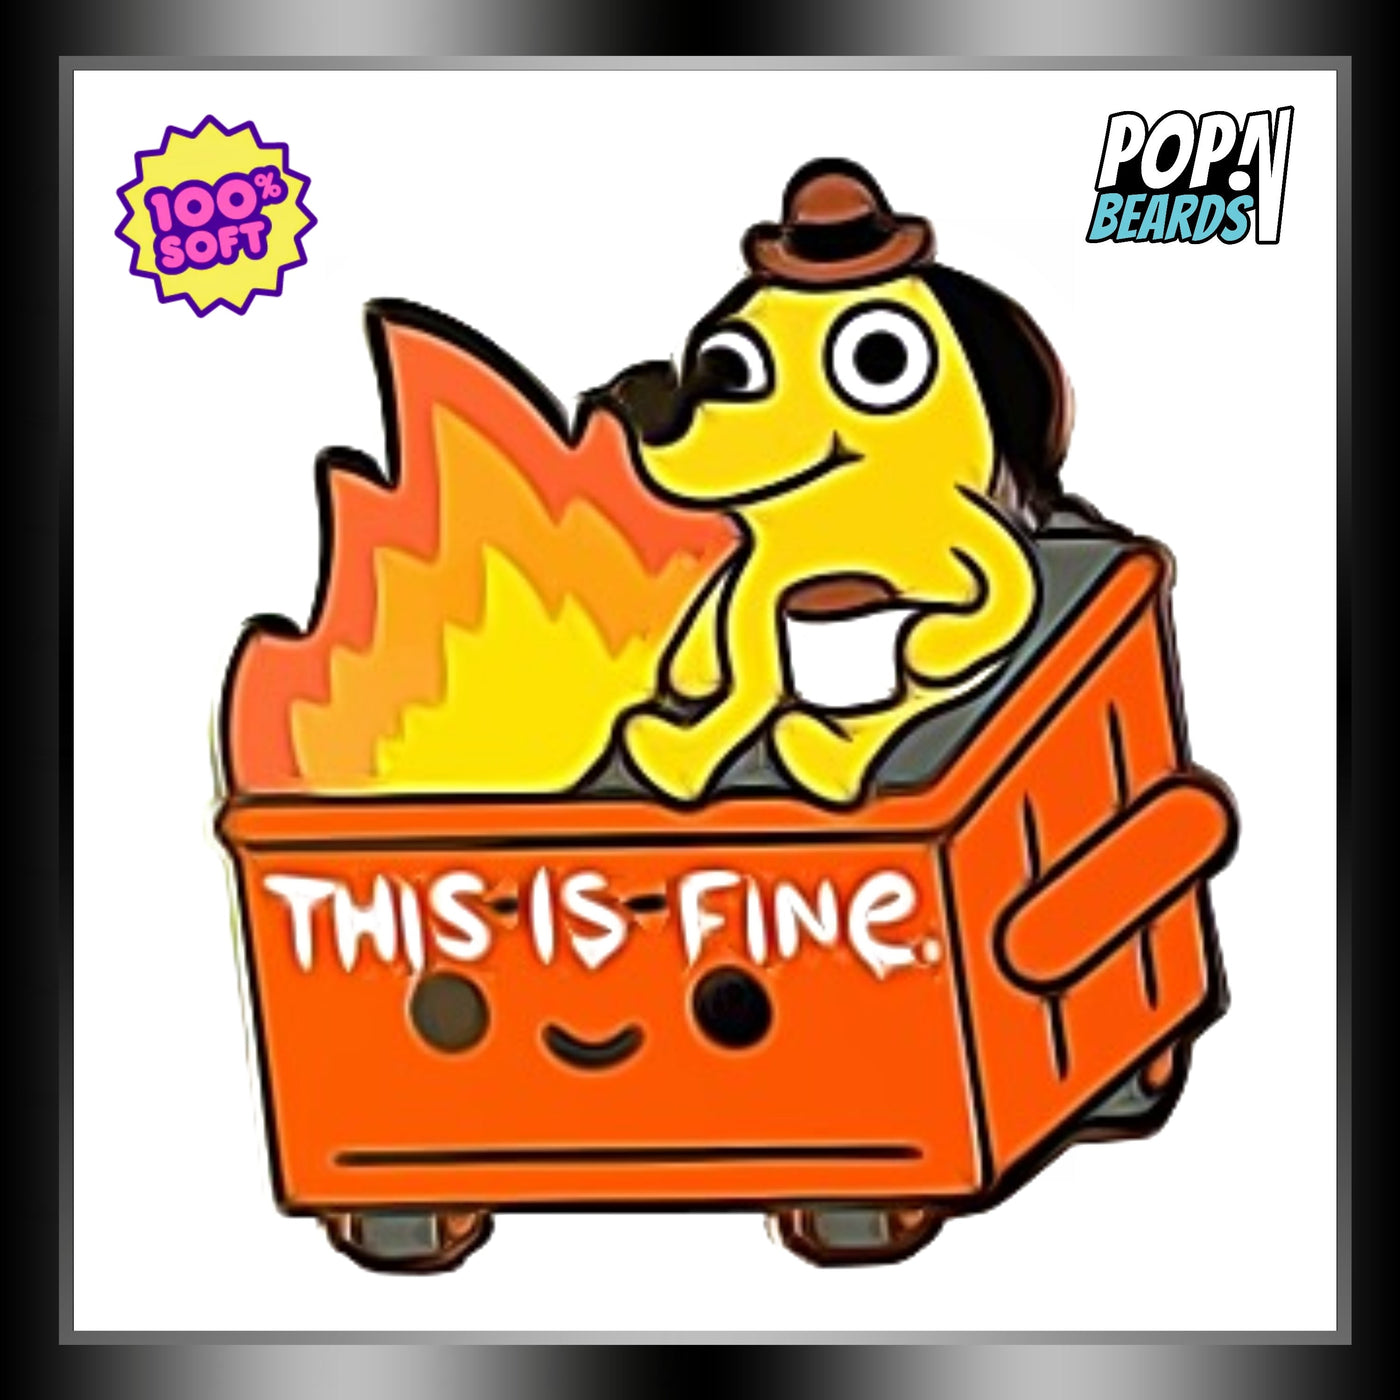 100% Soft: Pins (Dumpster Fire), This Is Fine